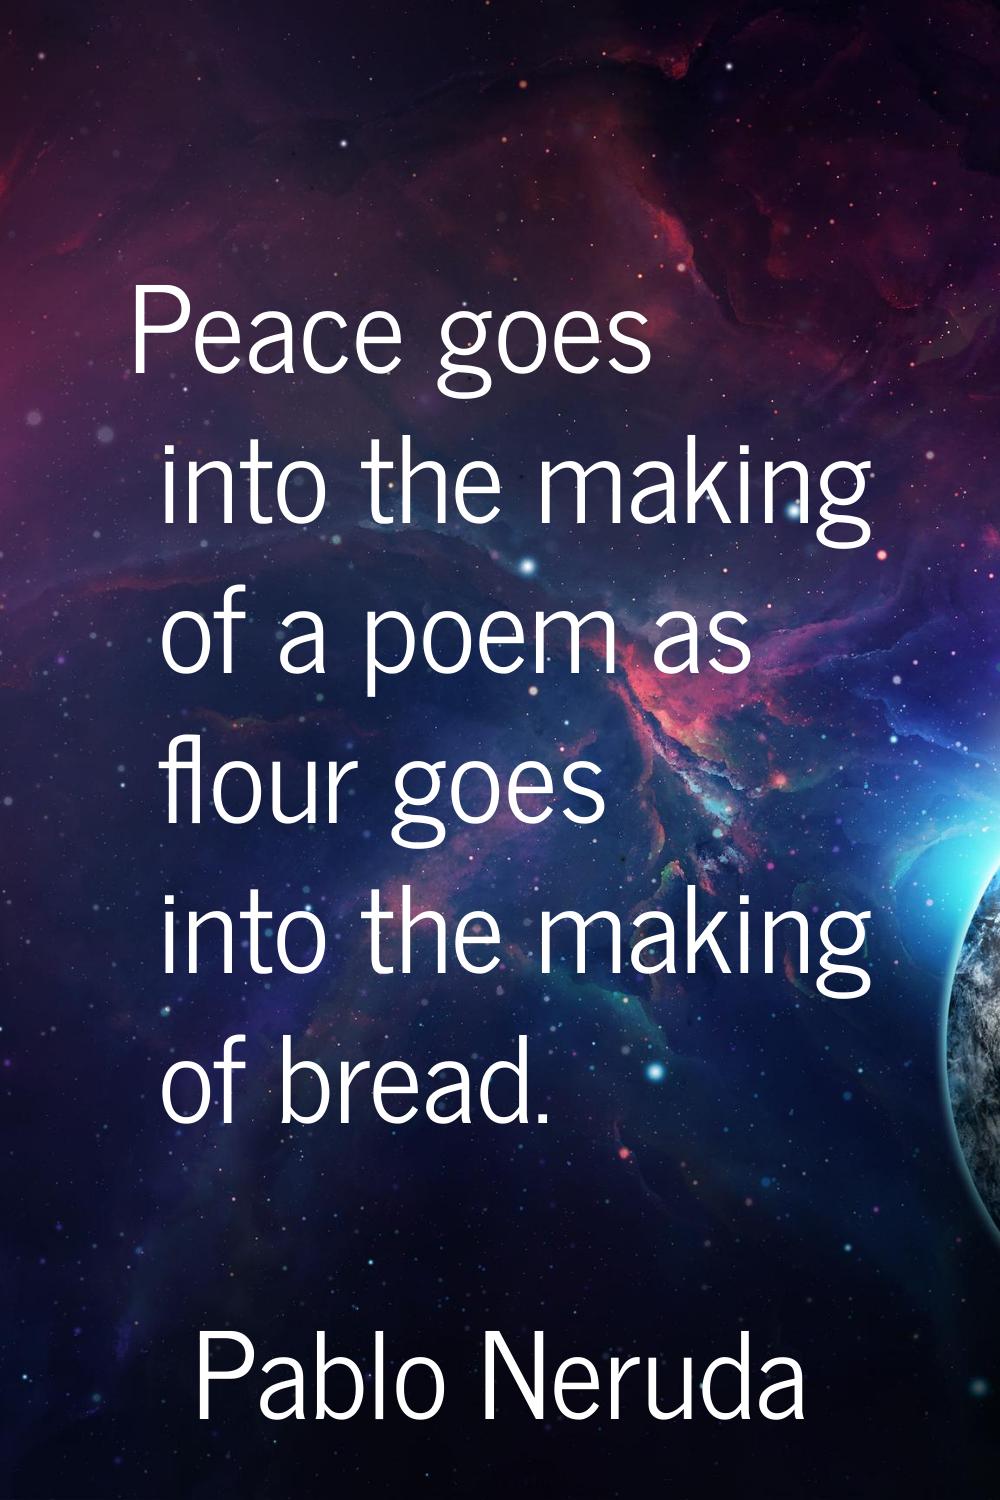 Peace goes into the making of a poem as flour goes into the making of bread.